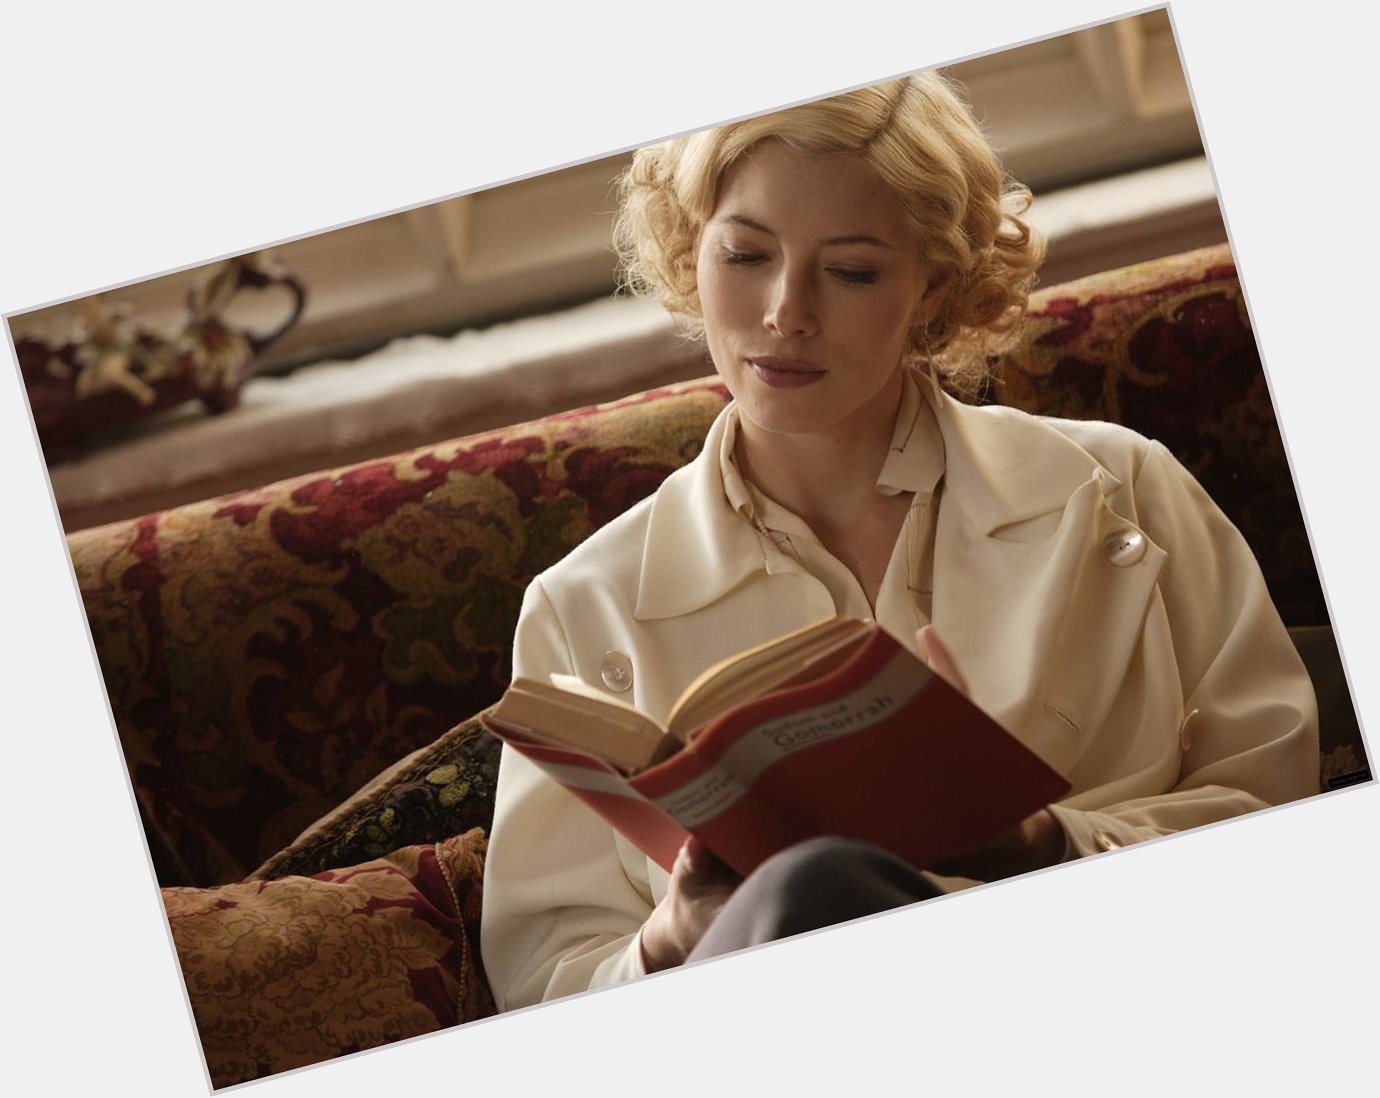 Happy Birthday To Jessica Biel! Here she is reading in the 2008 film Easy Virtue. 